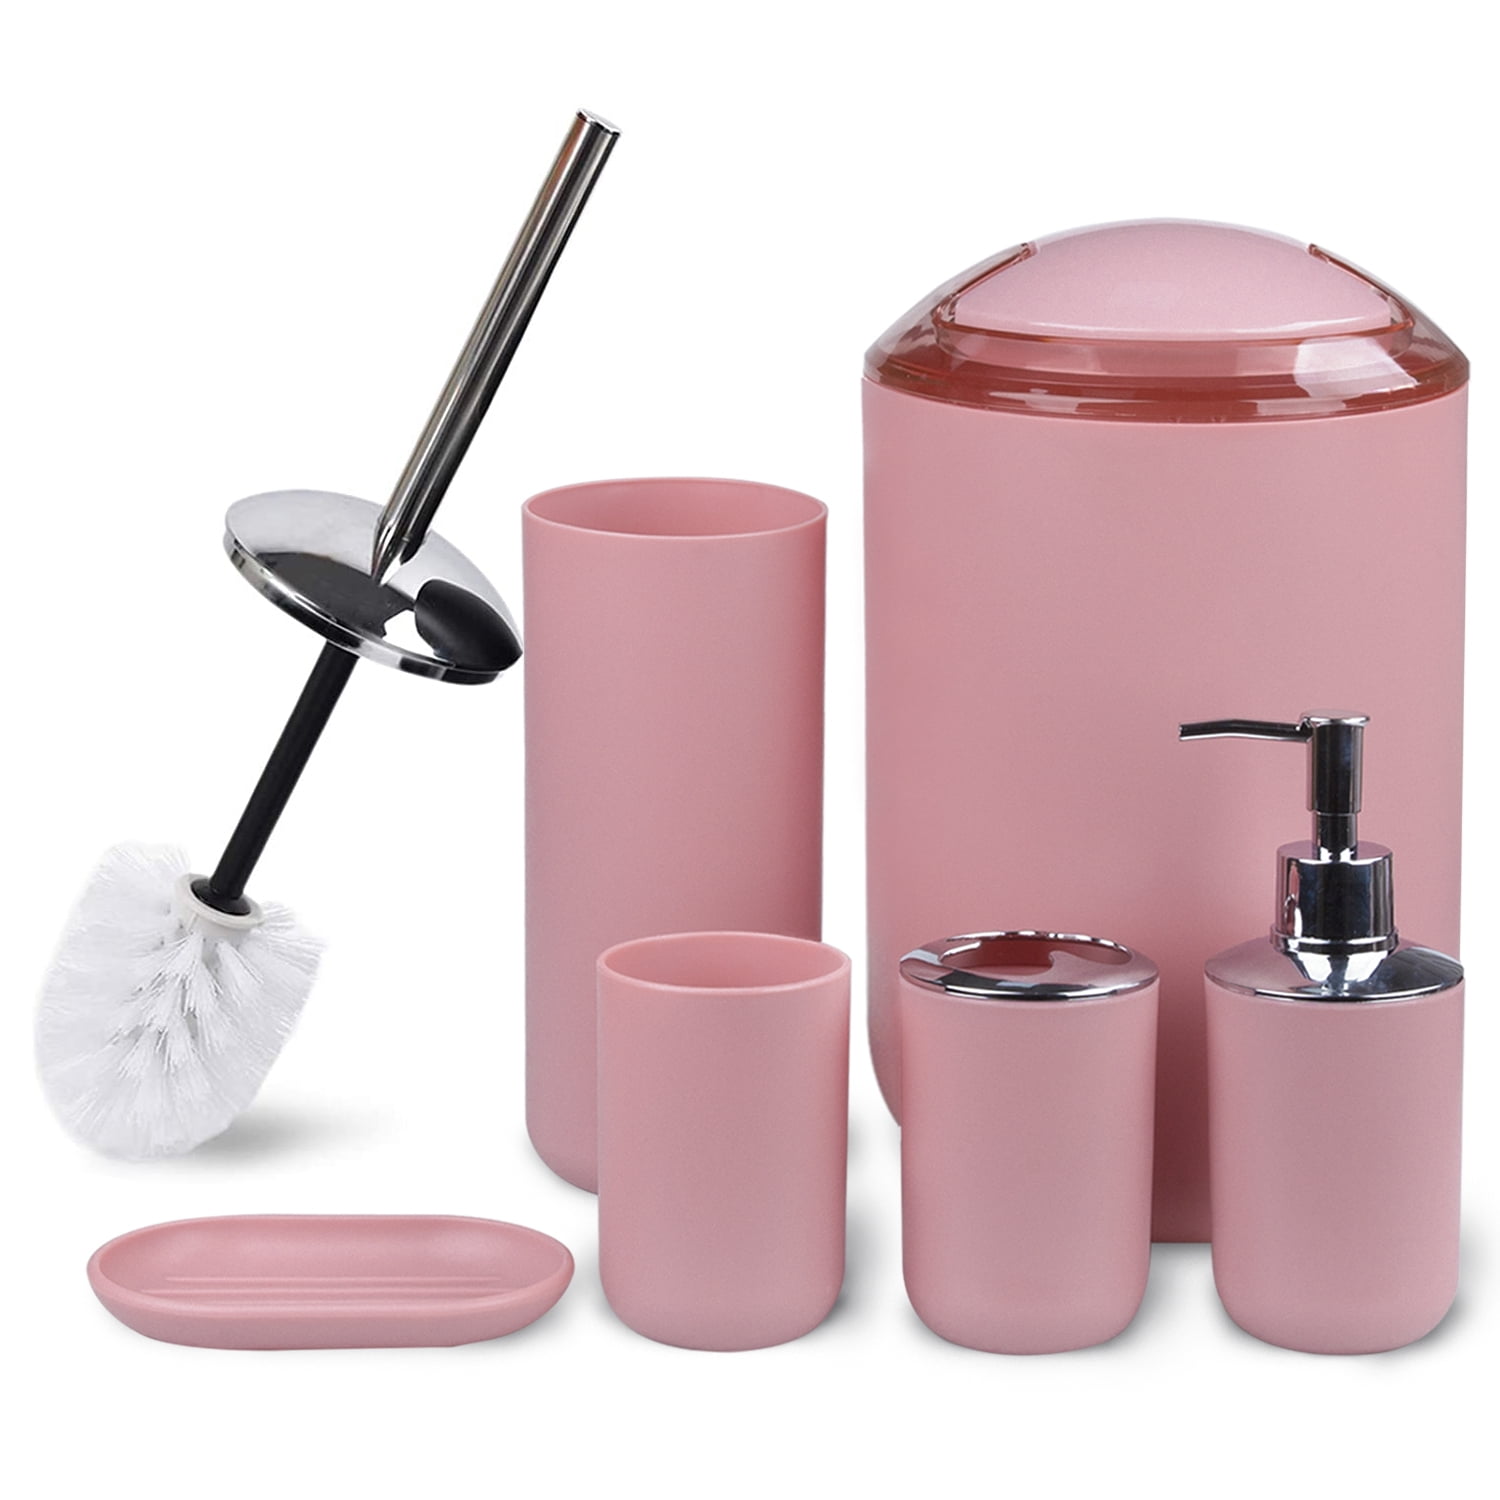 Glossy  *Lite-Pink-Peach* Sink Set…Ceramic Soap Dish...Cup & Toothbrush holder 